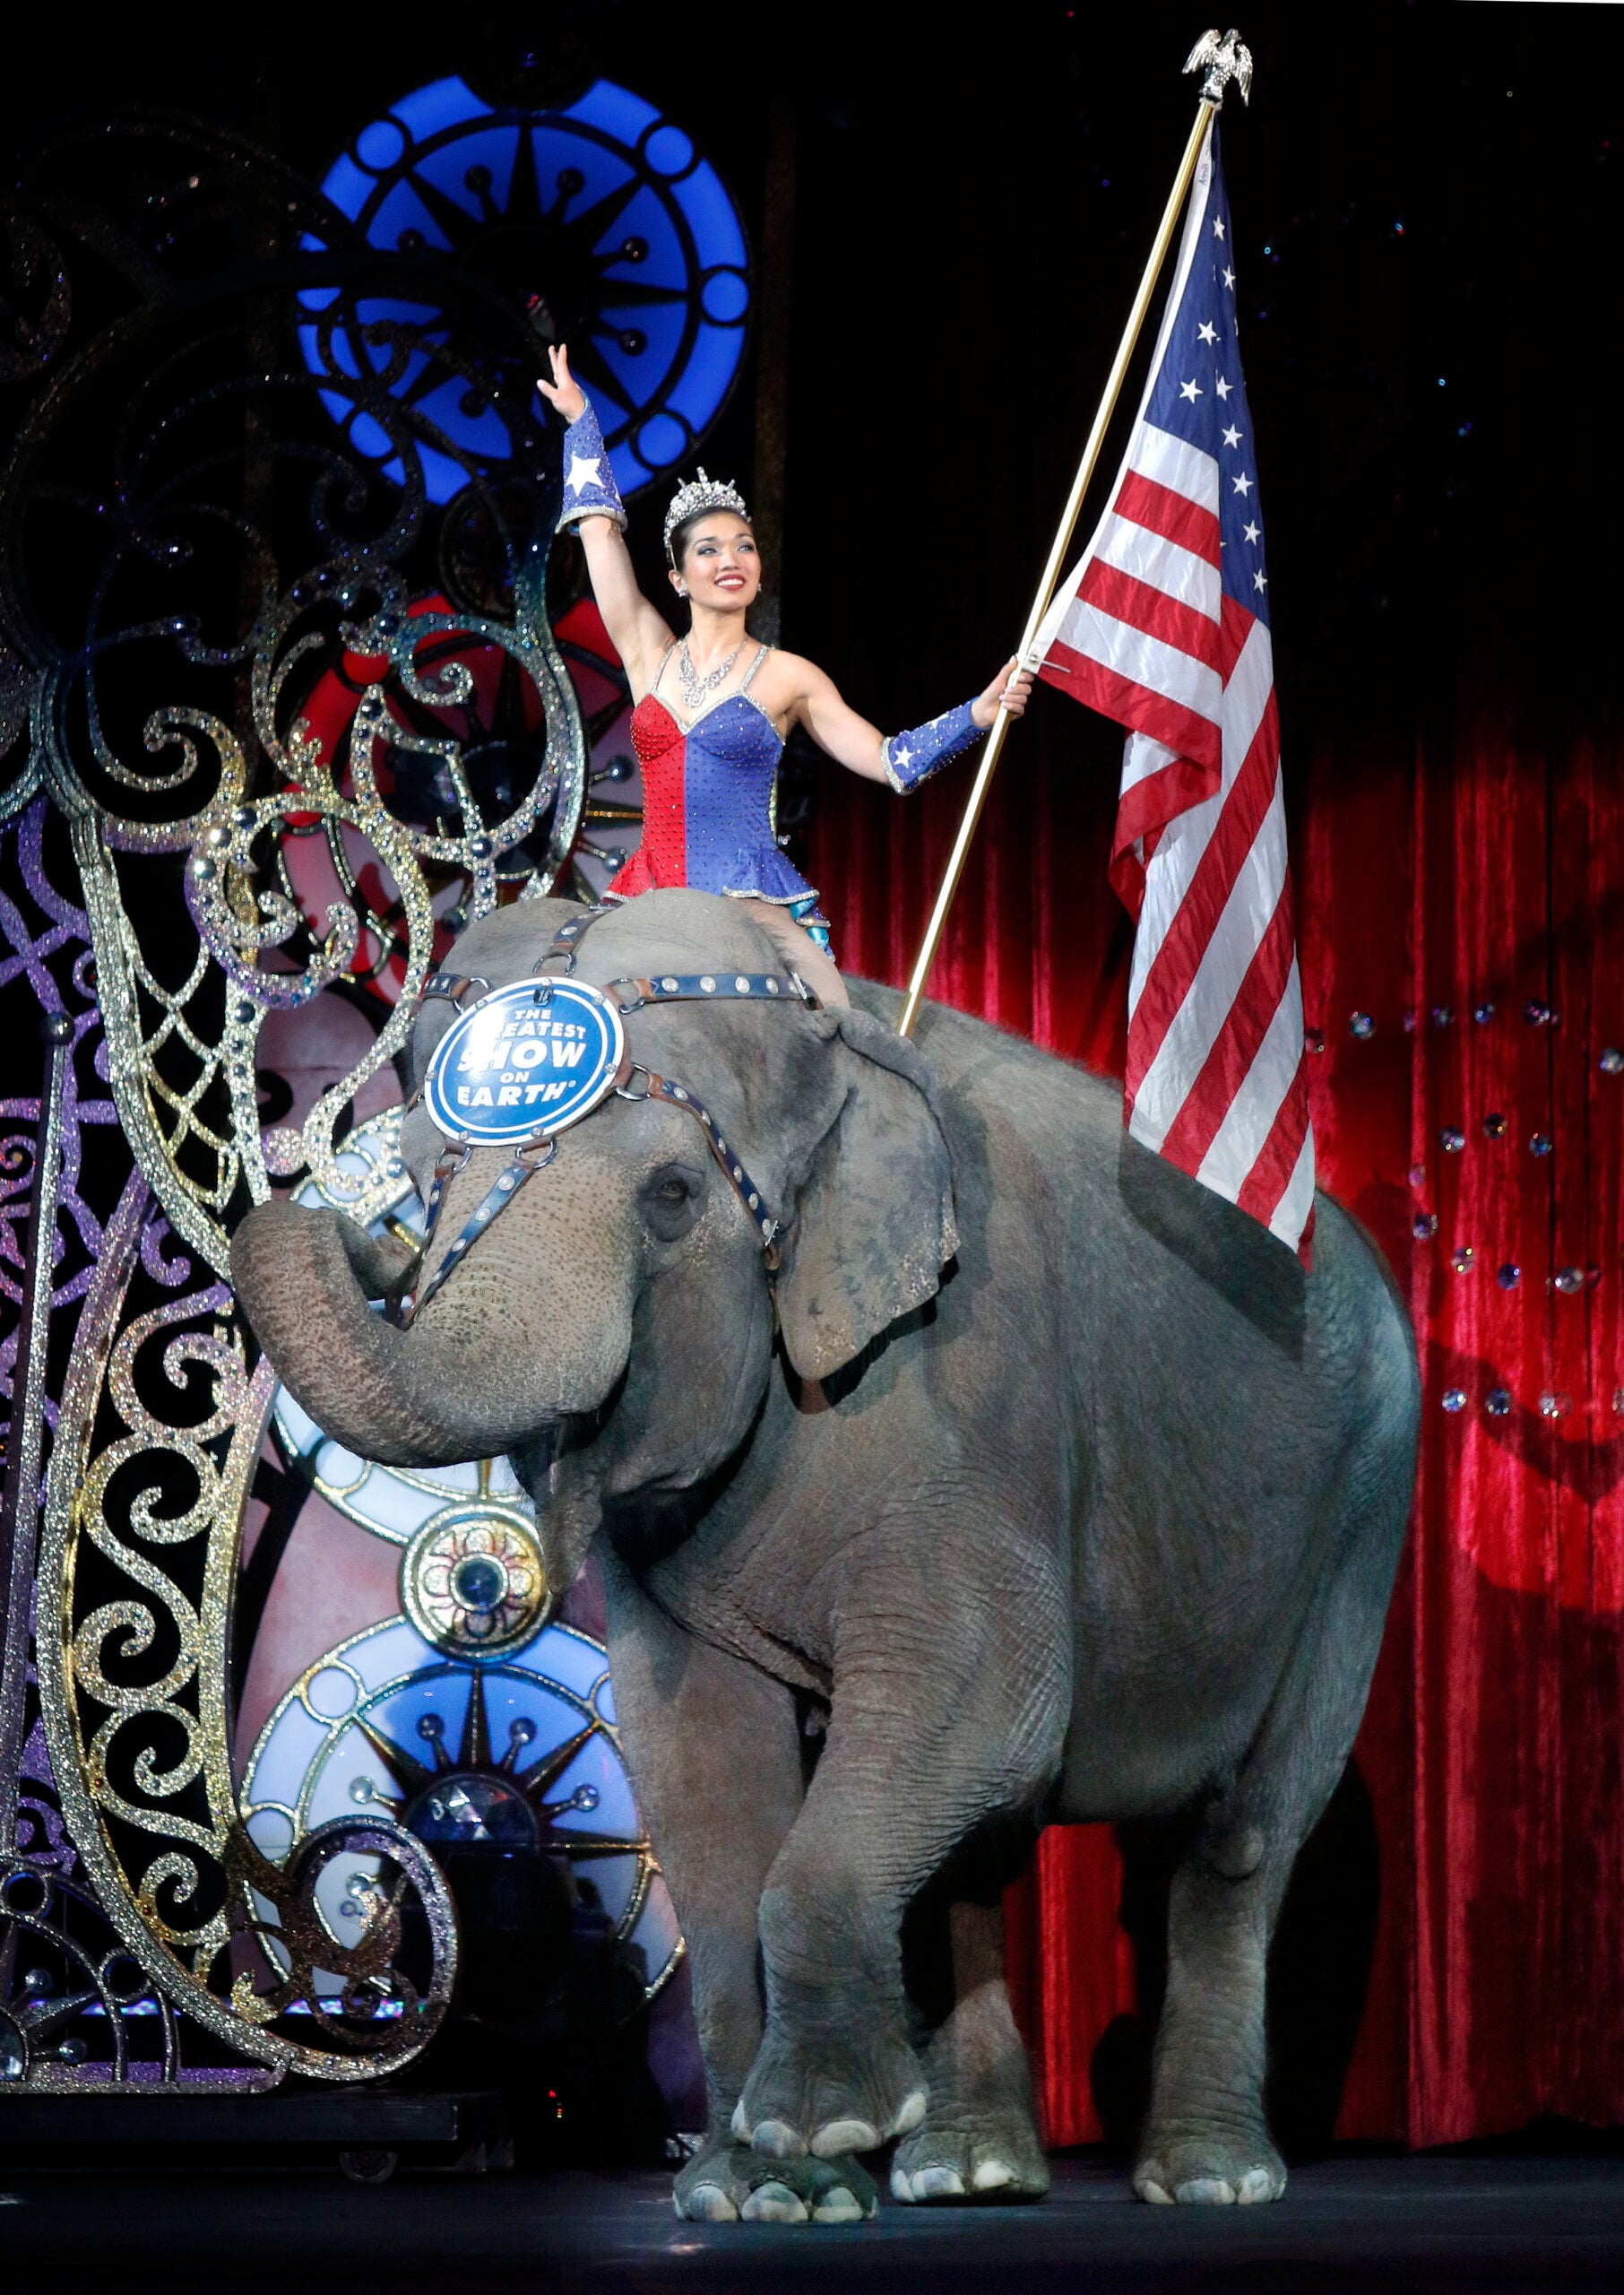 Elephants Perform For Final Time At Ringling Bros